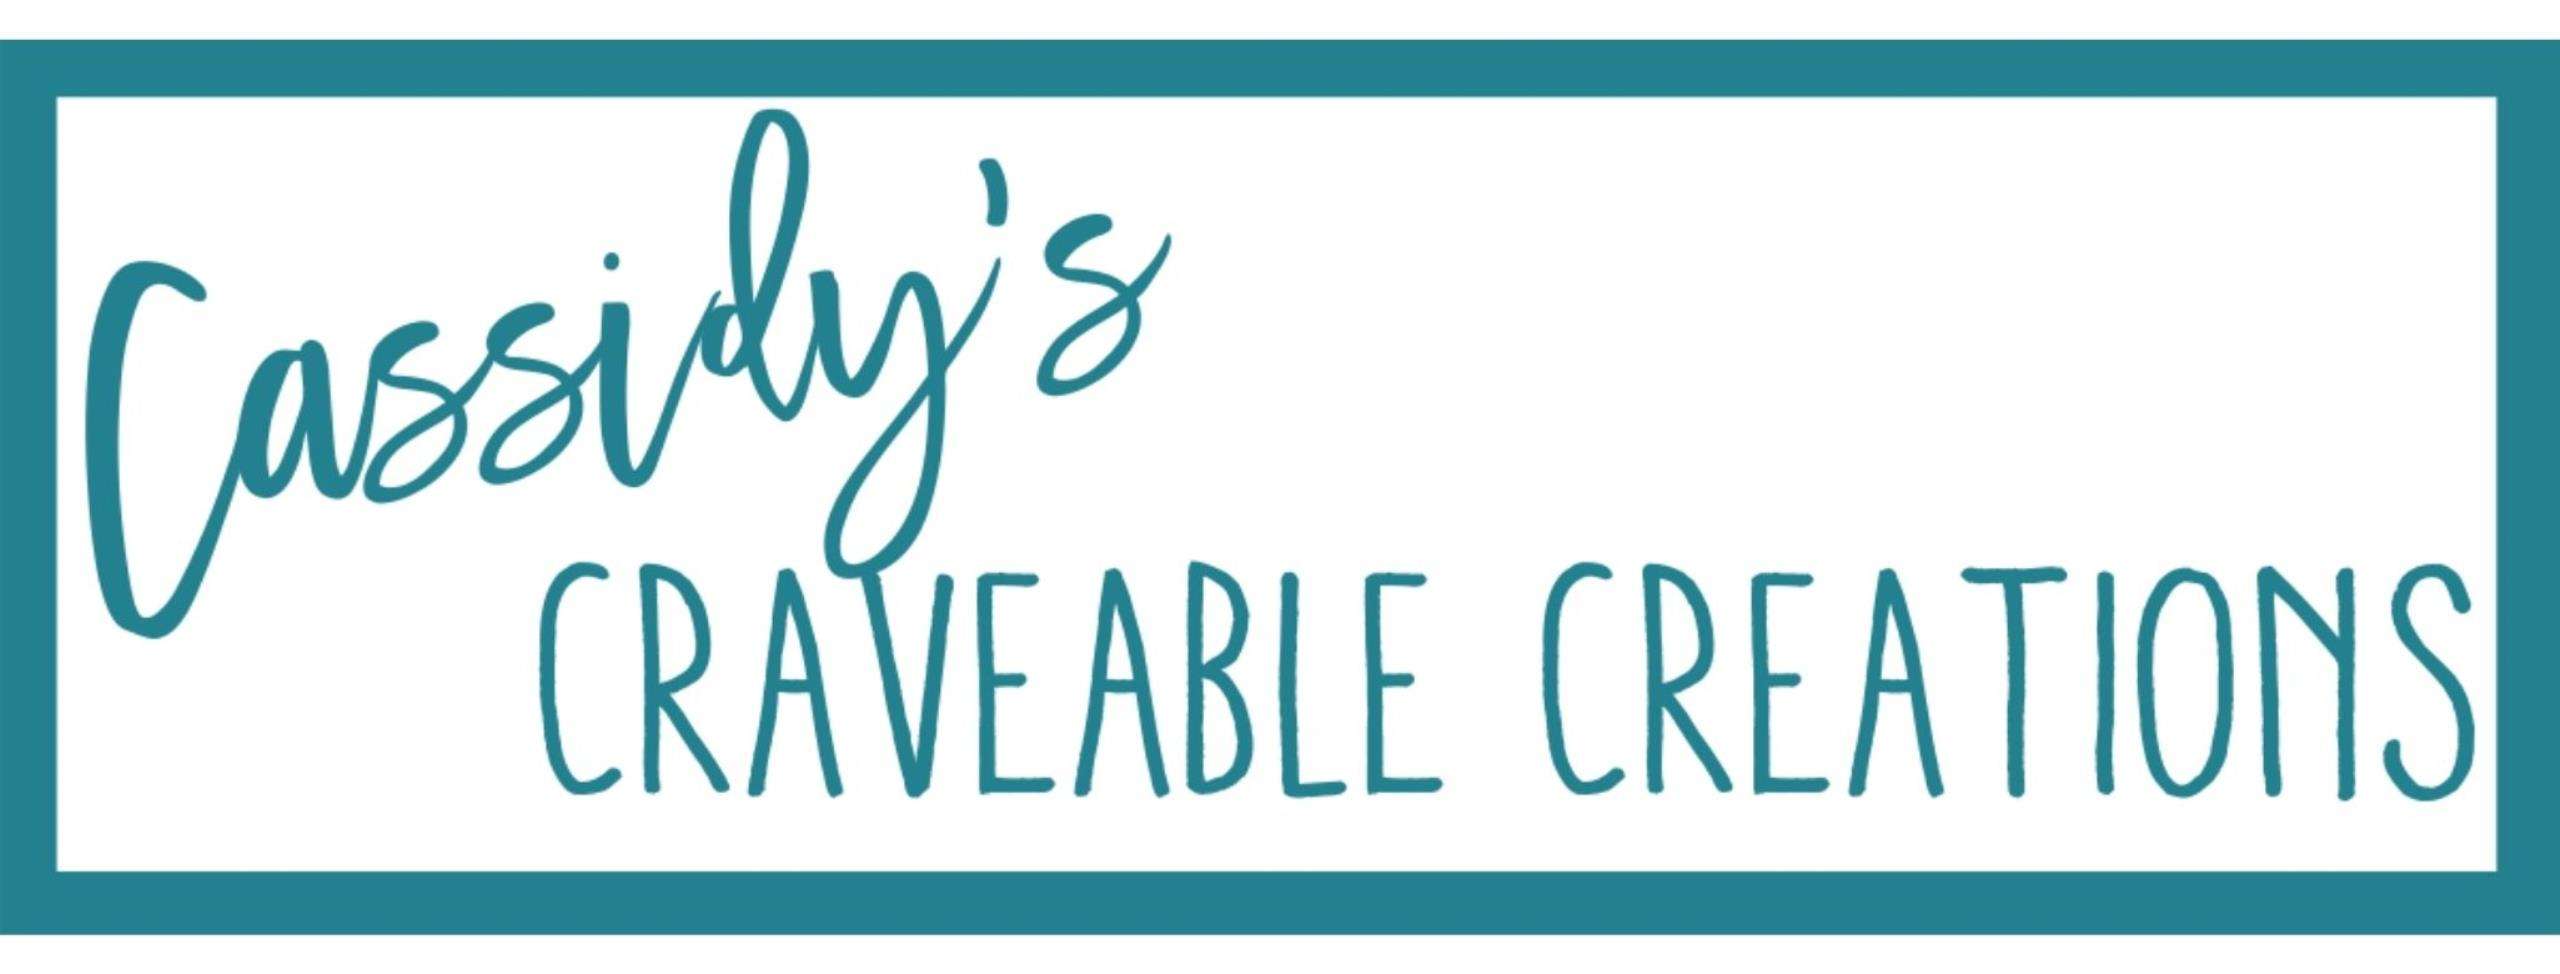 Cassidy's Craveable Creations Logo